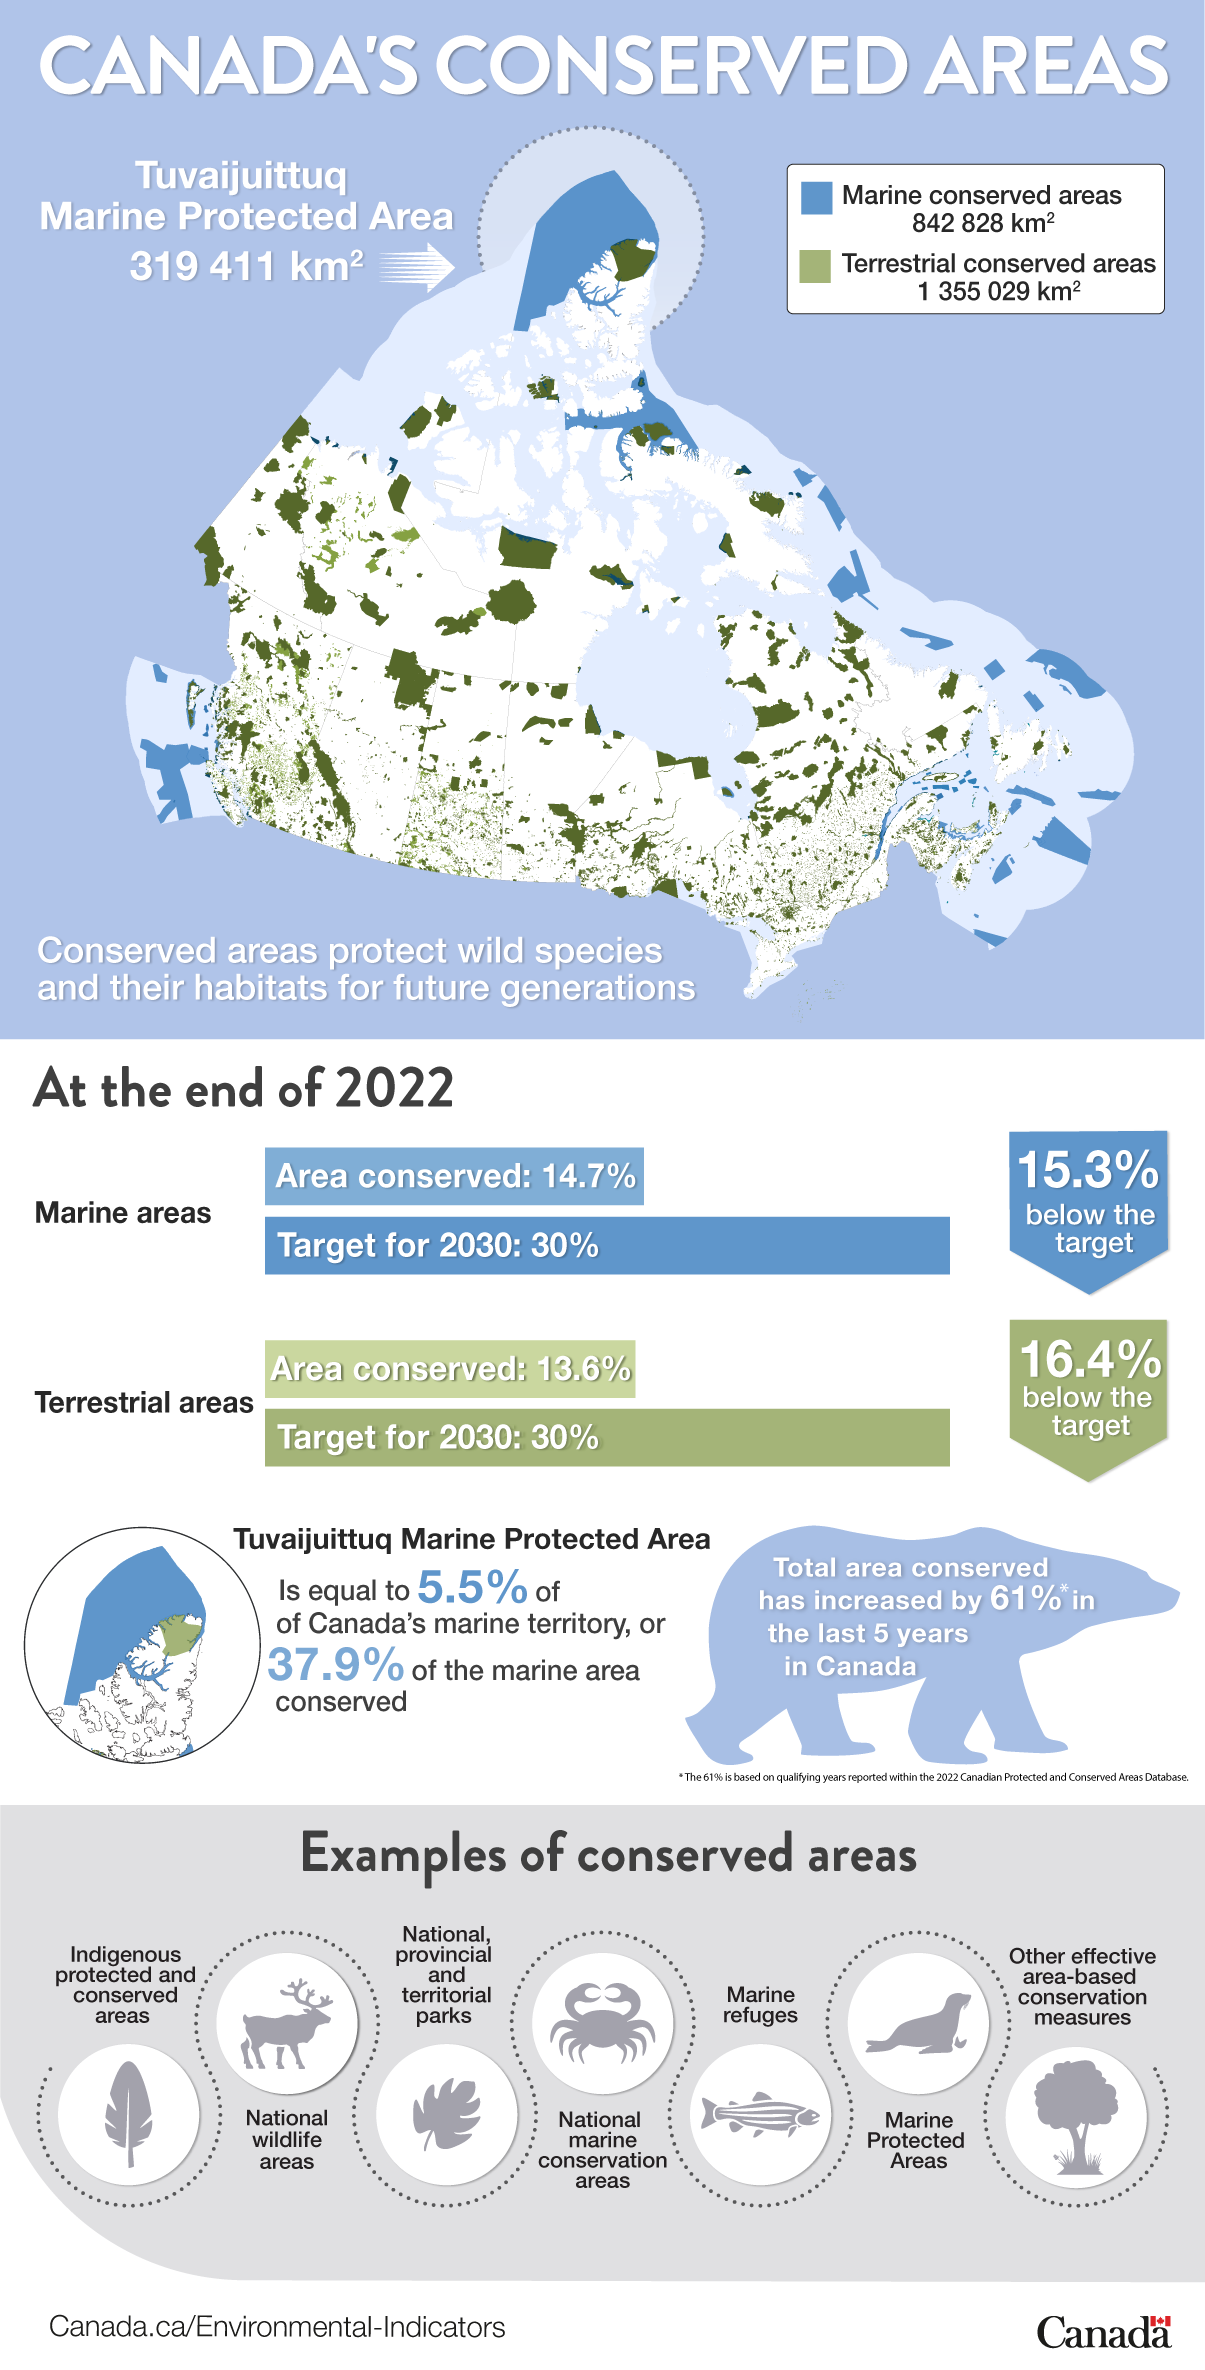 Infographic on Canada's conserved areas (see below for the long description)